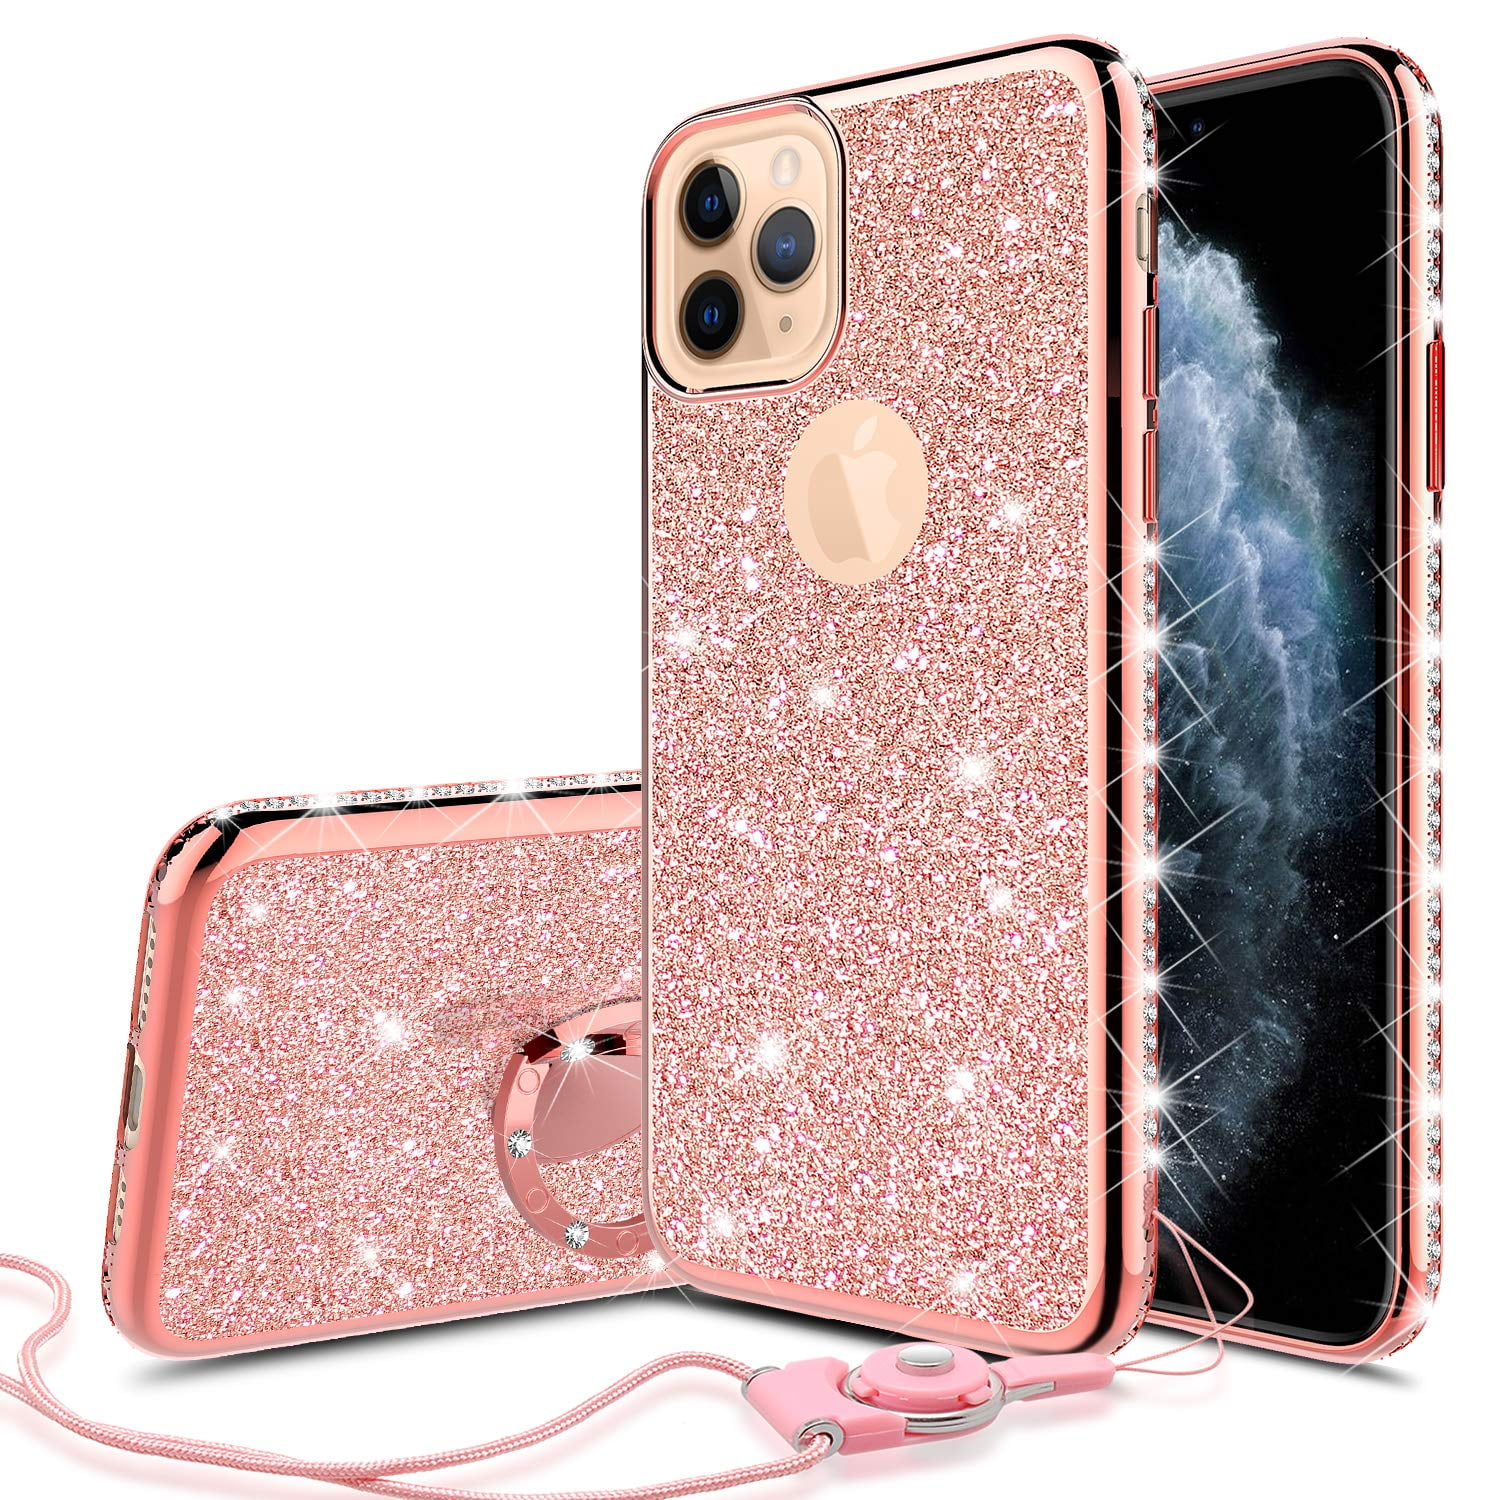 Apple iPhone 11 Pro Max Case for Girl Women, Glitter Cute Girly